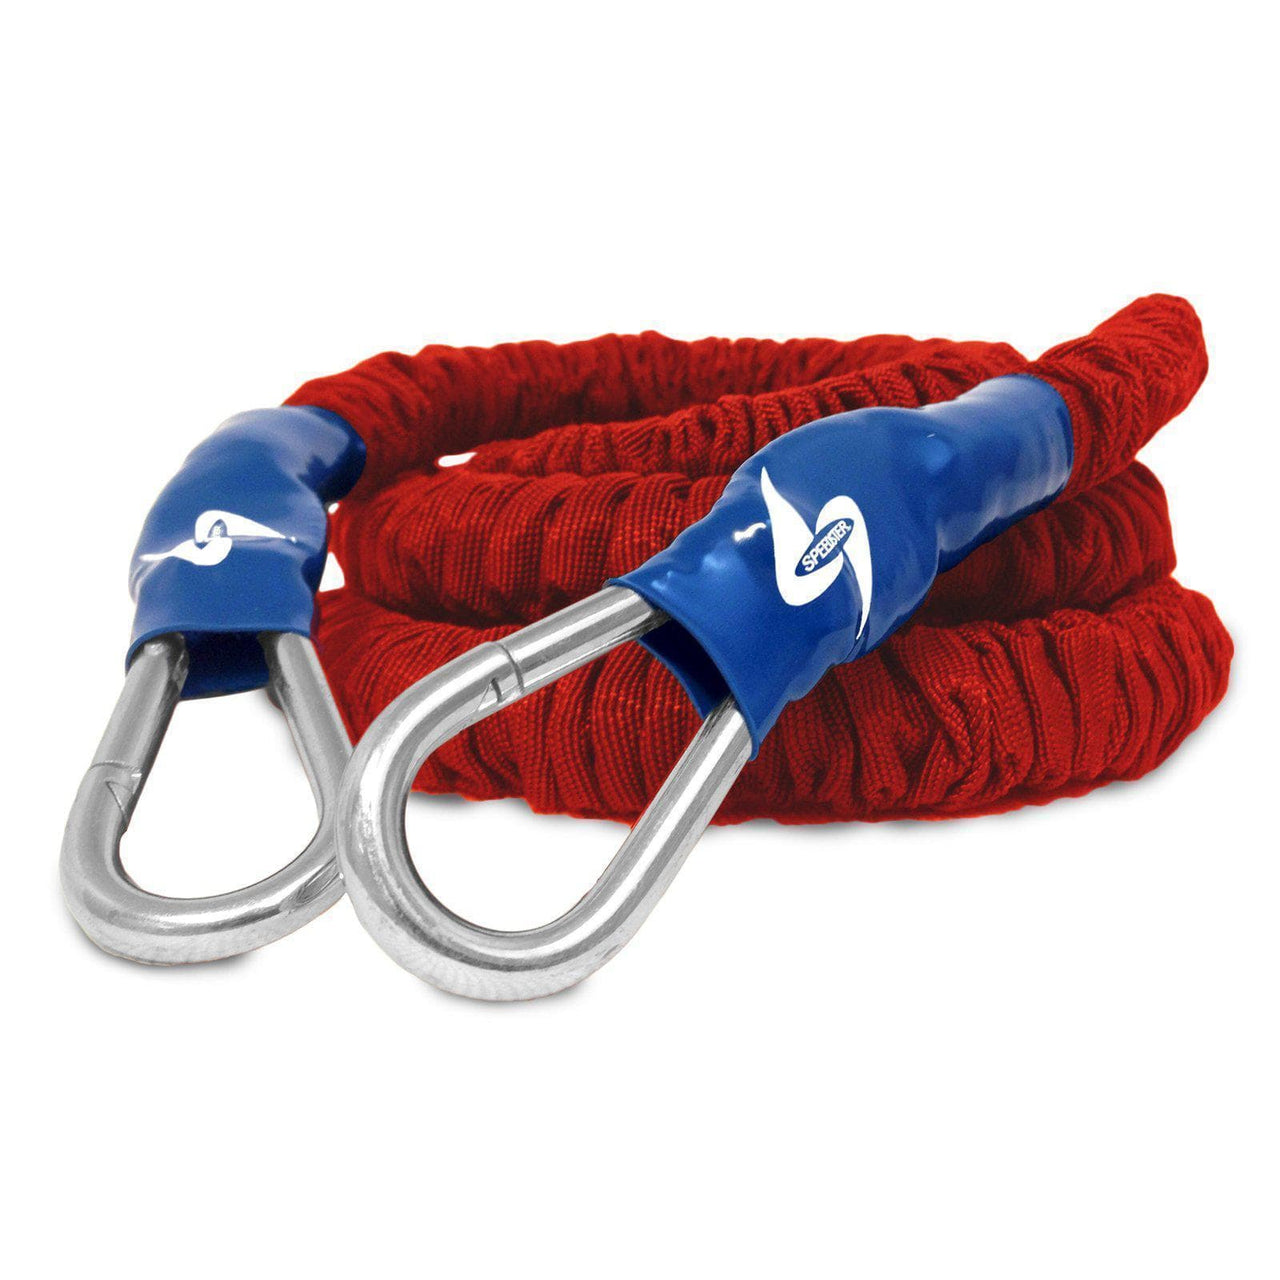 Athletic trainer resistance bungee cords for coaches, organizations and trainers use these to increase speed in all sports great for speed and overspeed.